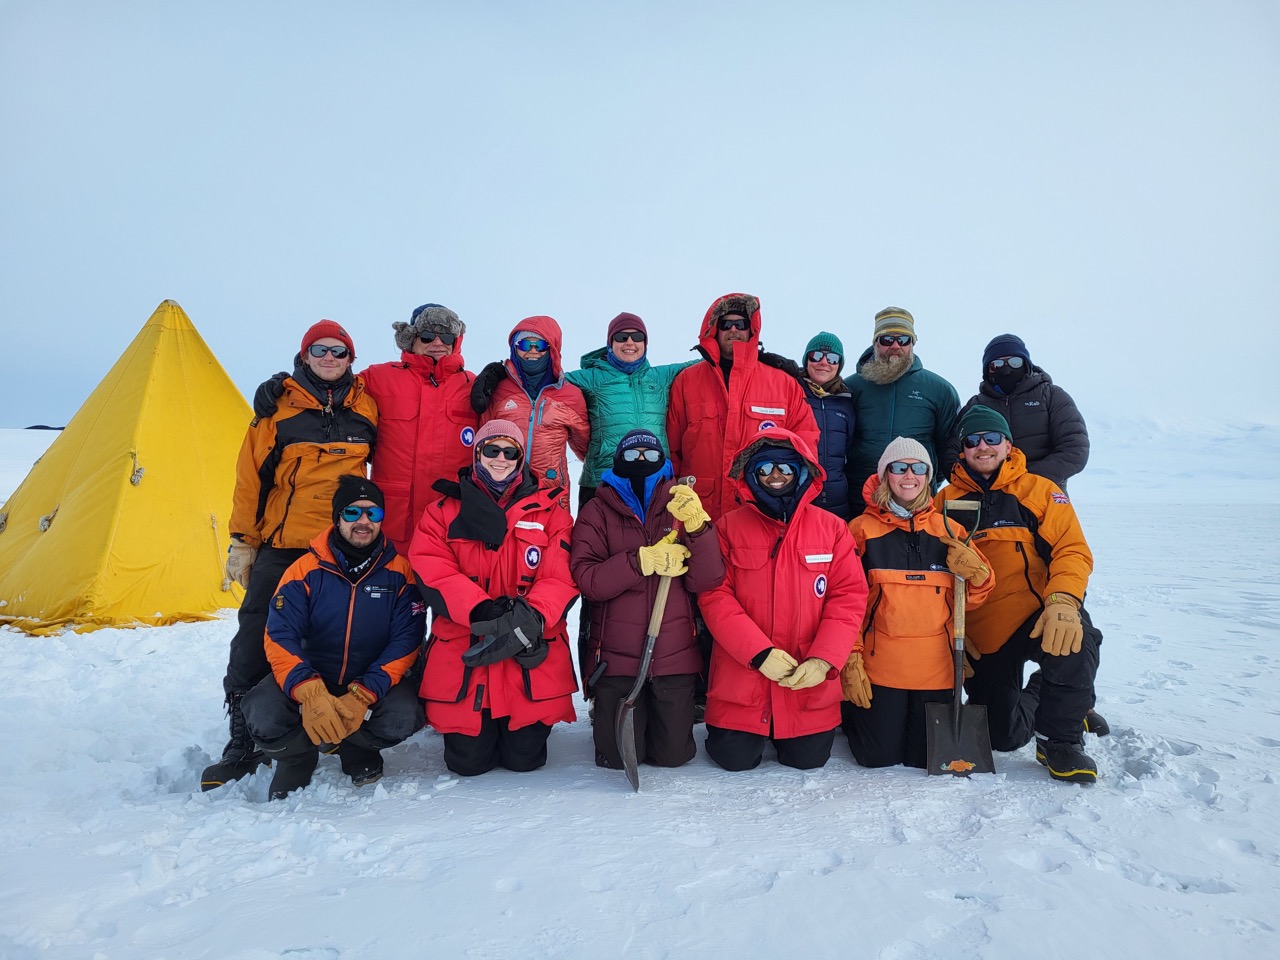 The TIME project field team stops for a group photo during safety training near McMurdo. Photo credit: Marianne Karplus